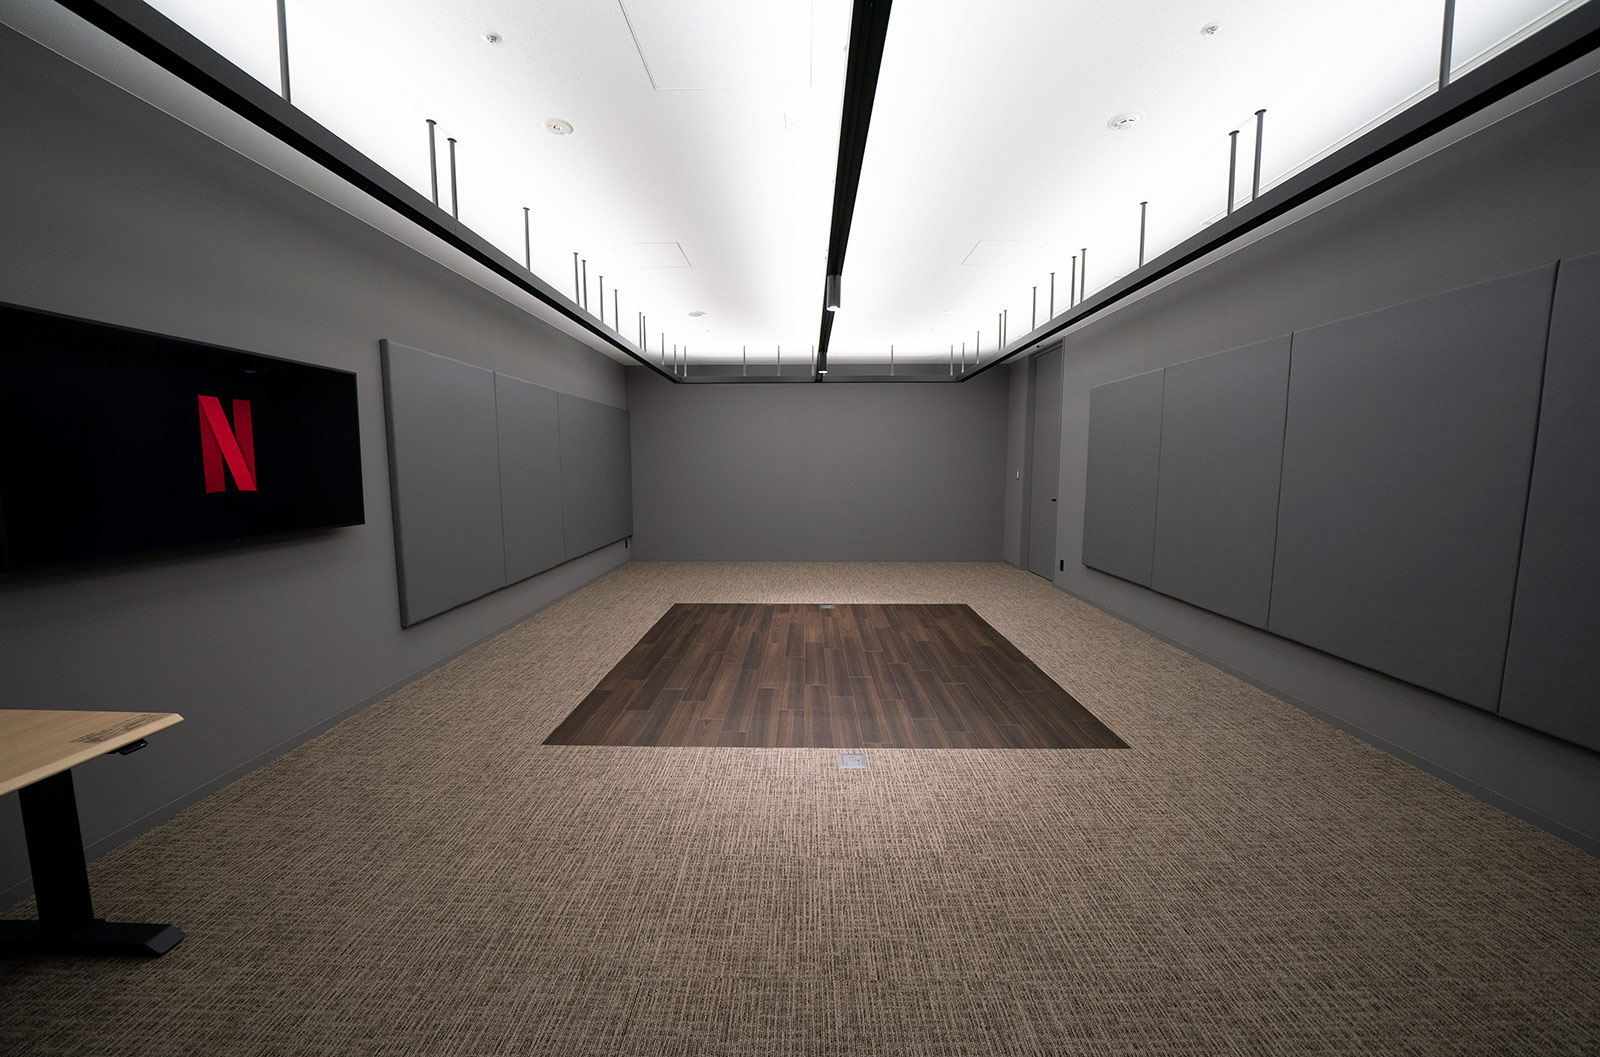  strongLab:/strong This multi-functional space is designed to be a versatile room for innovation, like testing out new creative technologies such as vr or playing around with the latest motion capture technologies.